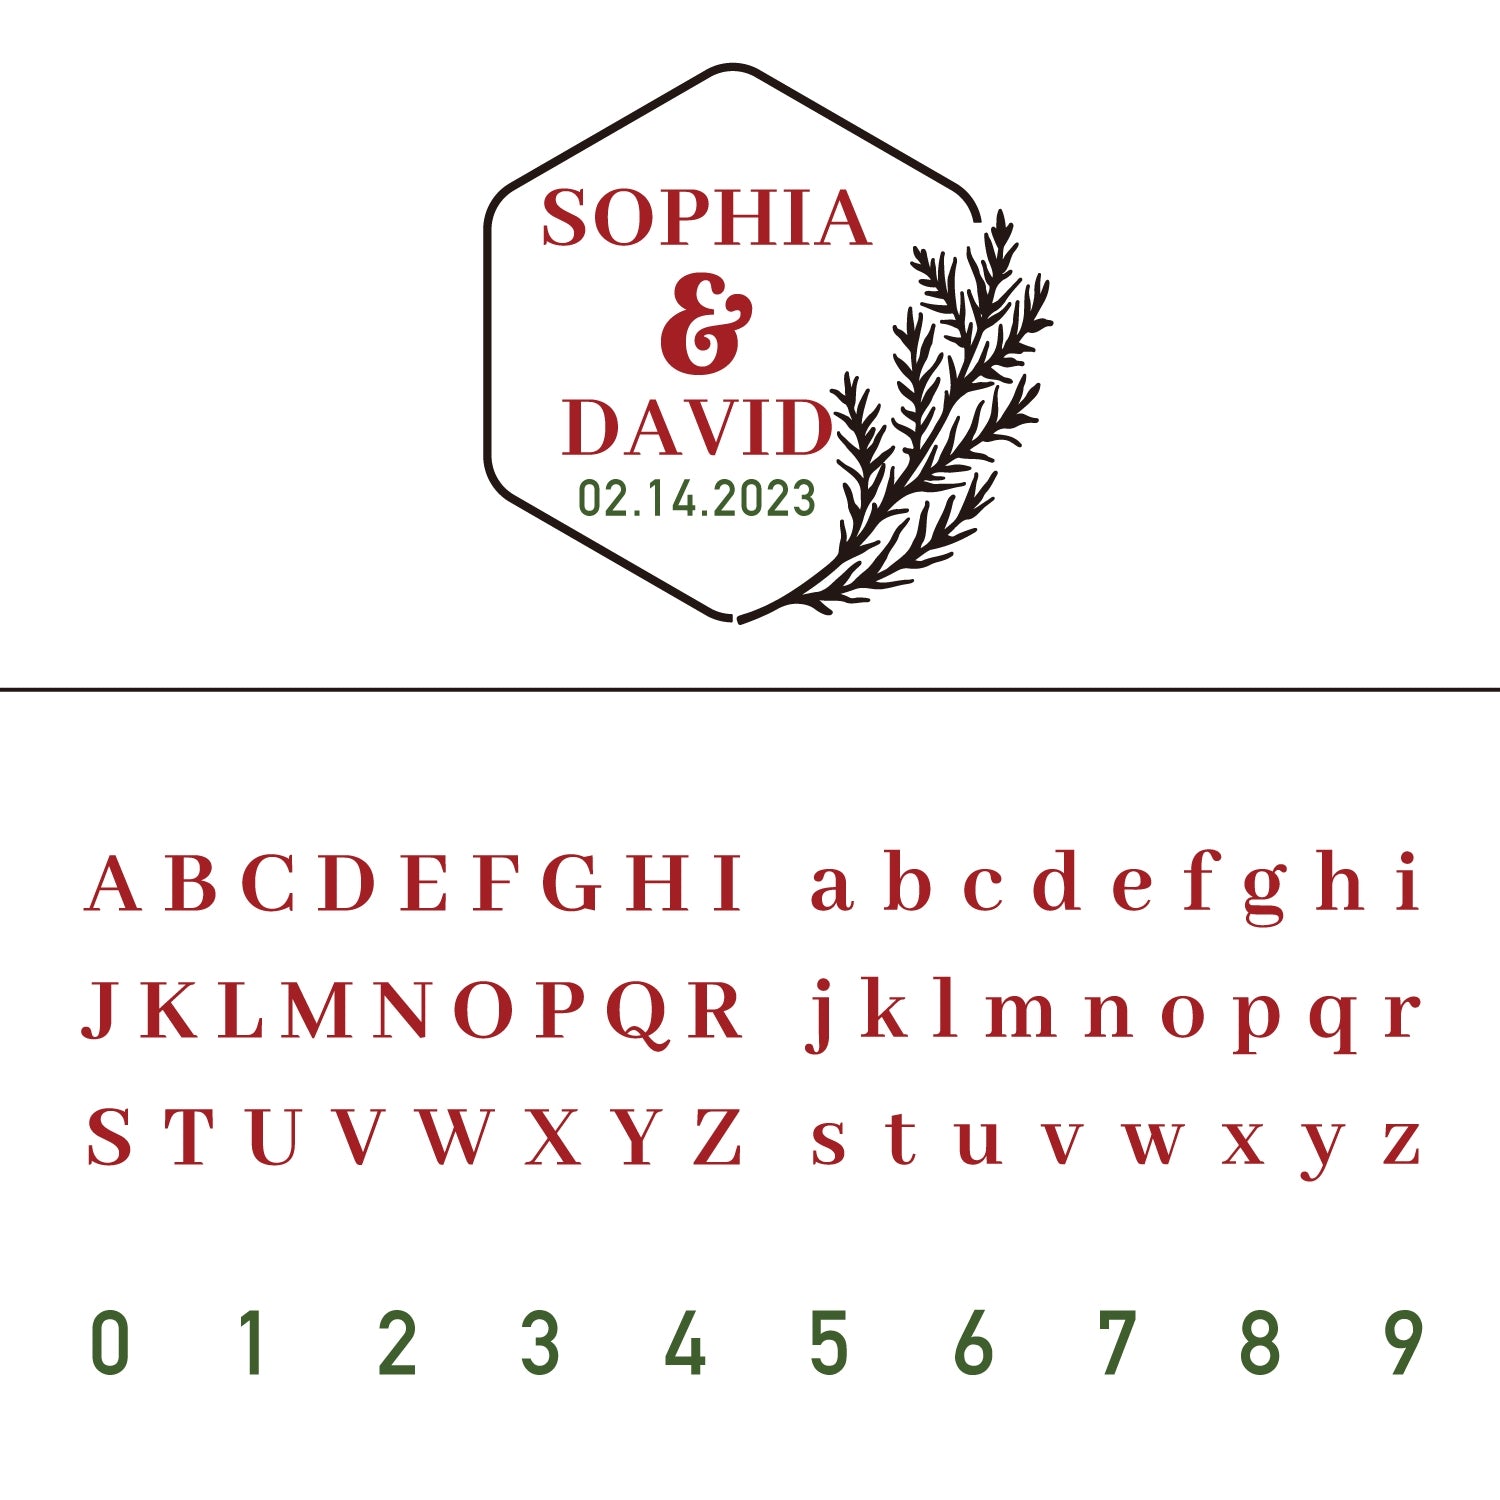 Custom Olive Branch Wedding Name and Date Wax Seal Stamp 9